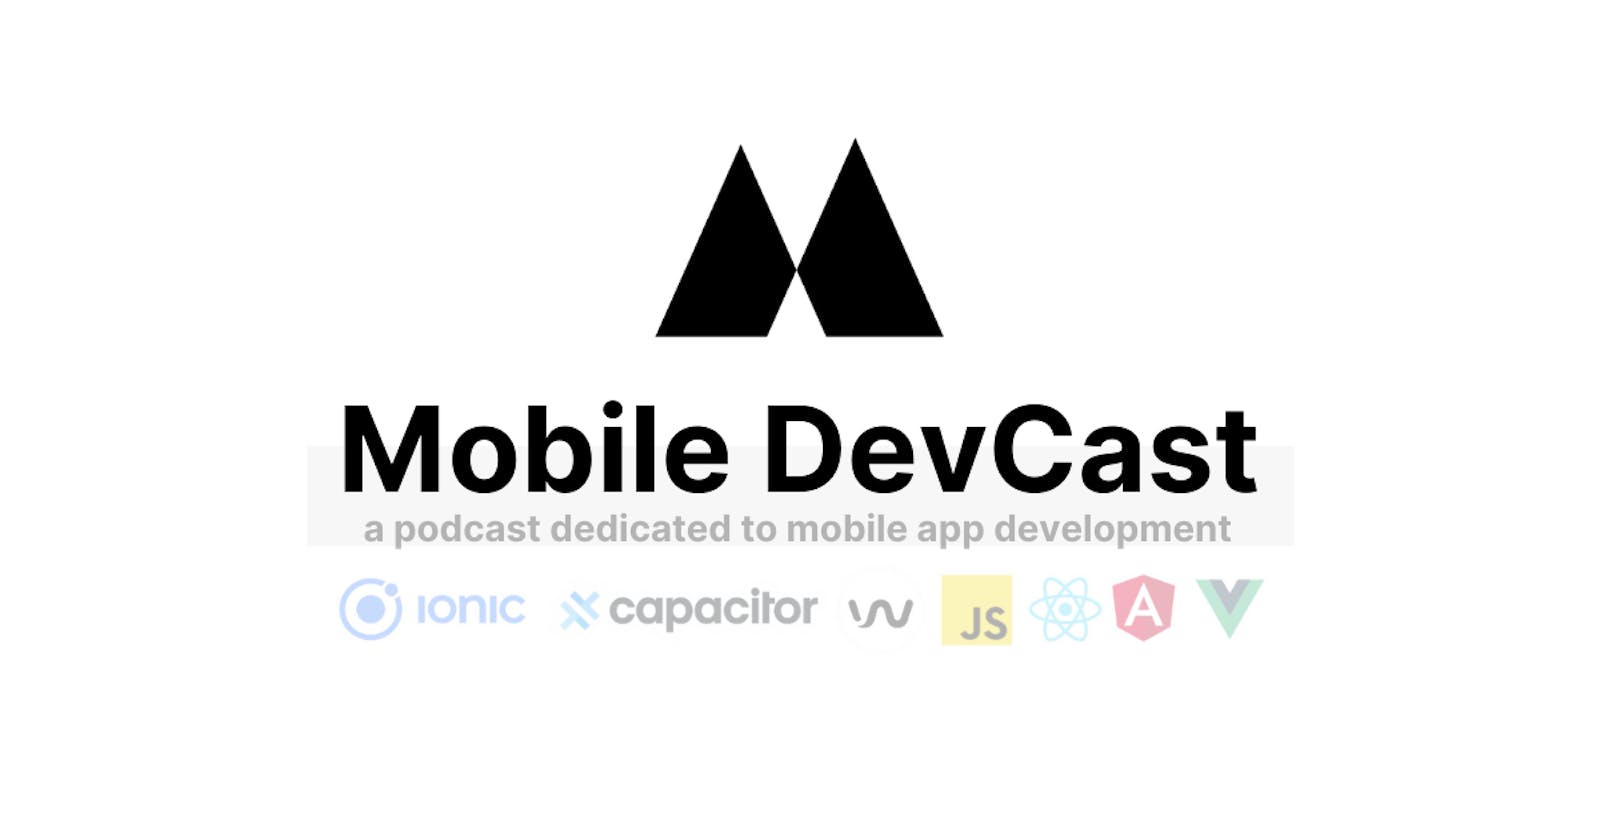 Mobile DevCast - A podcast dedicated to mobile app development and web native technologies